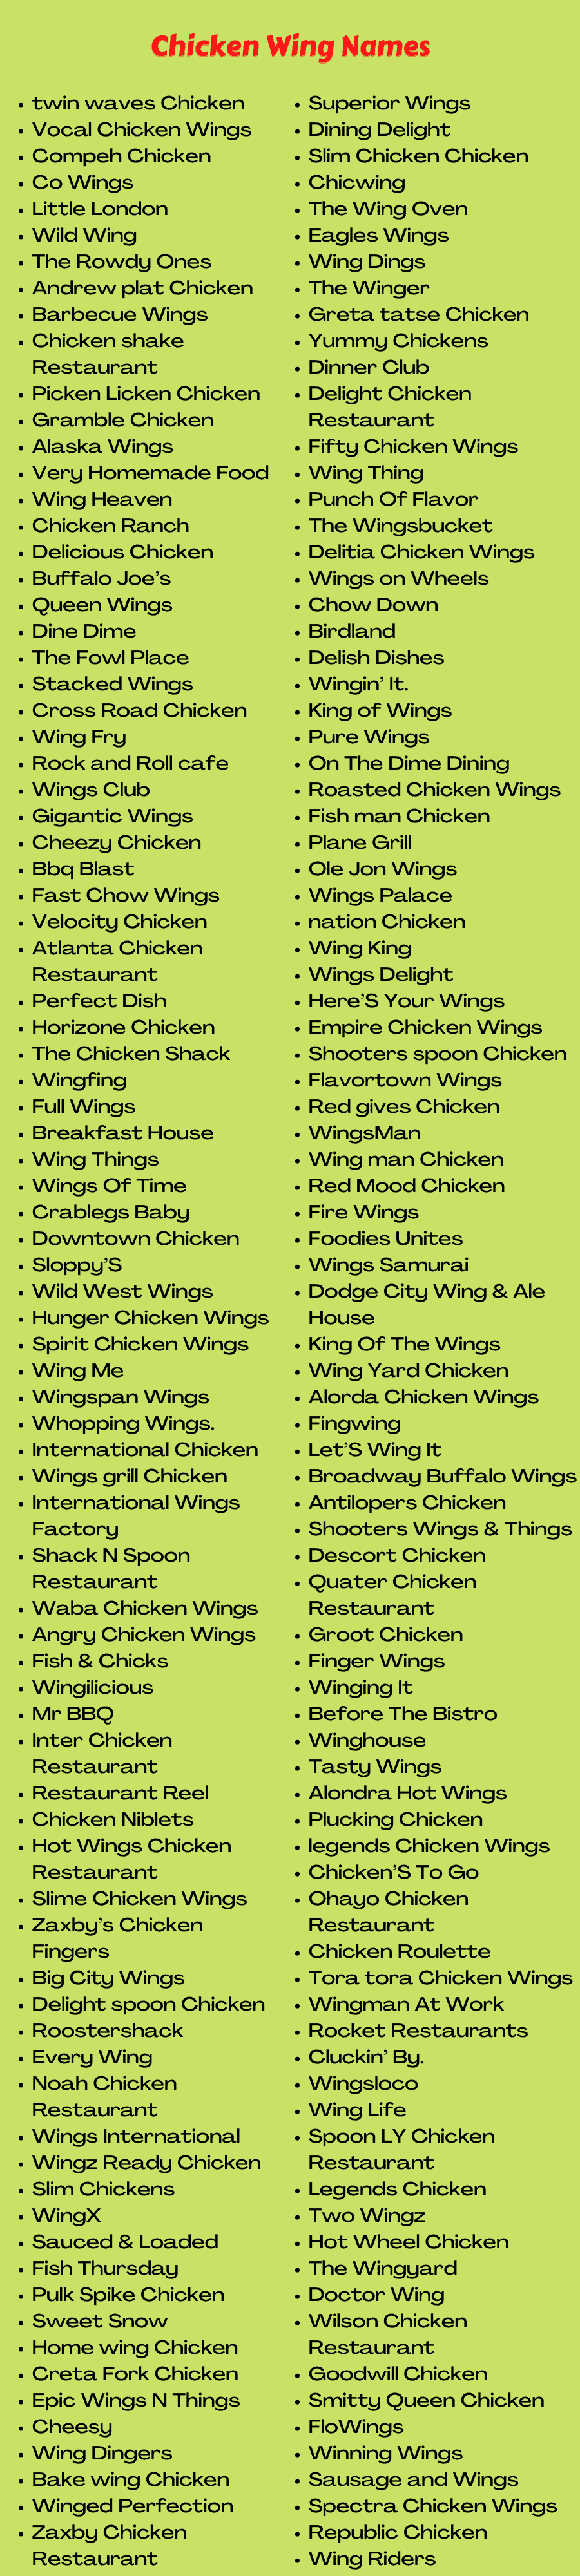 Chicken Wing Names 